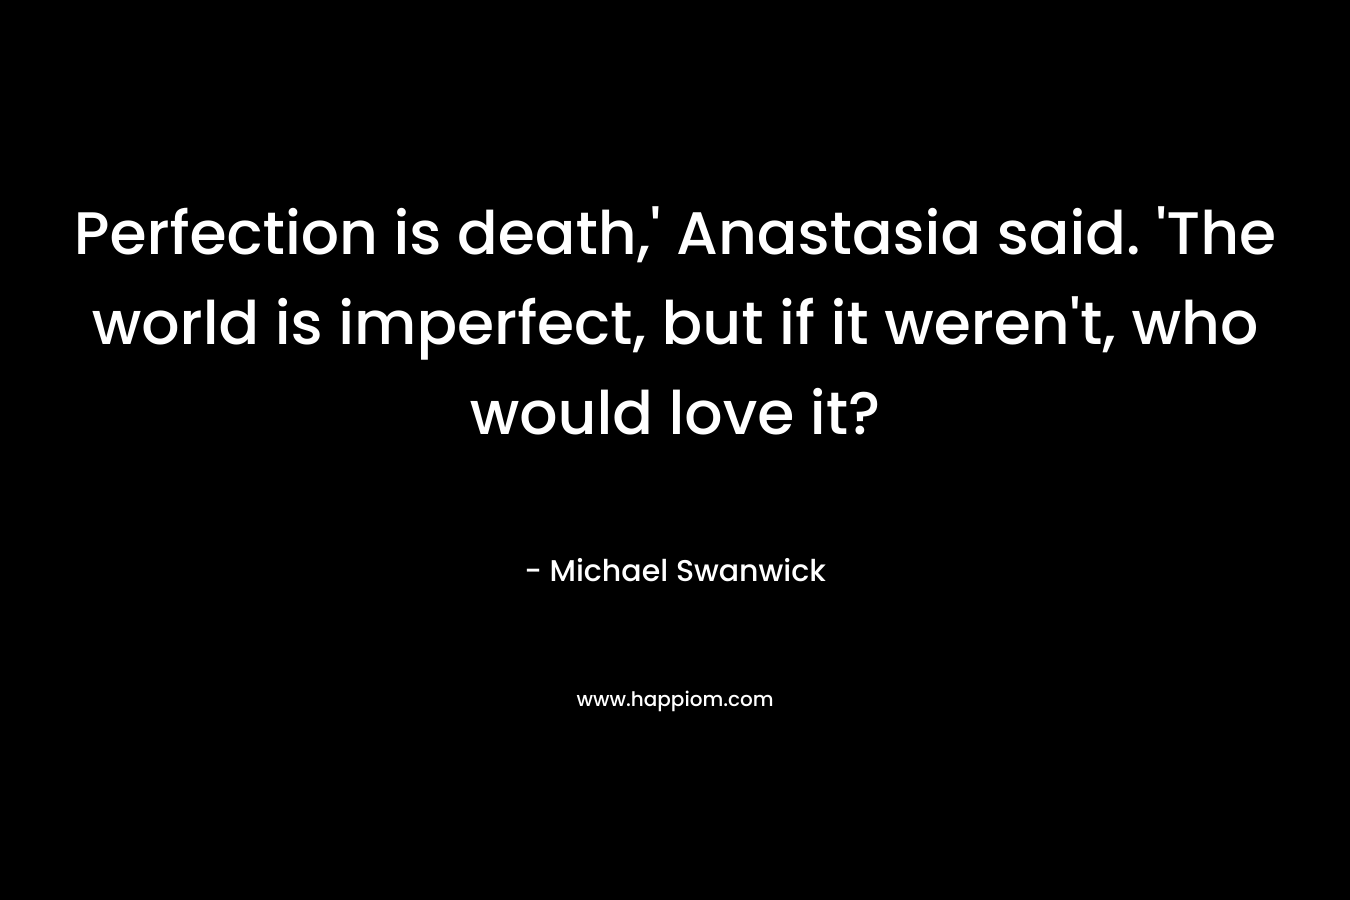 Perfection is death,' Anastasia said. 'The world is imperfect, but if it weren't, who would love it?